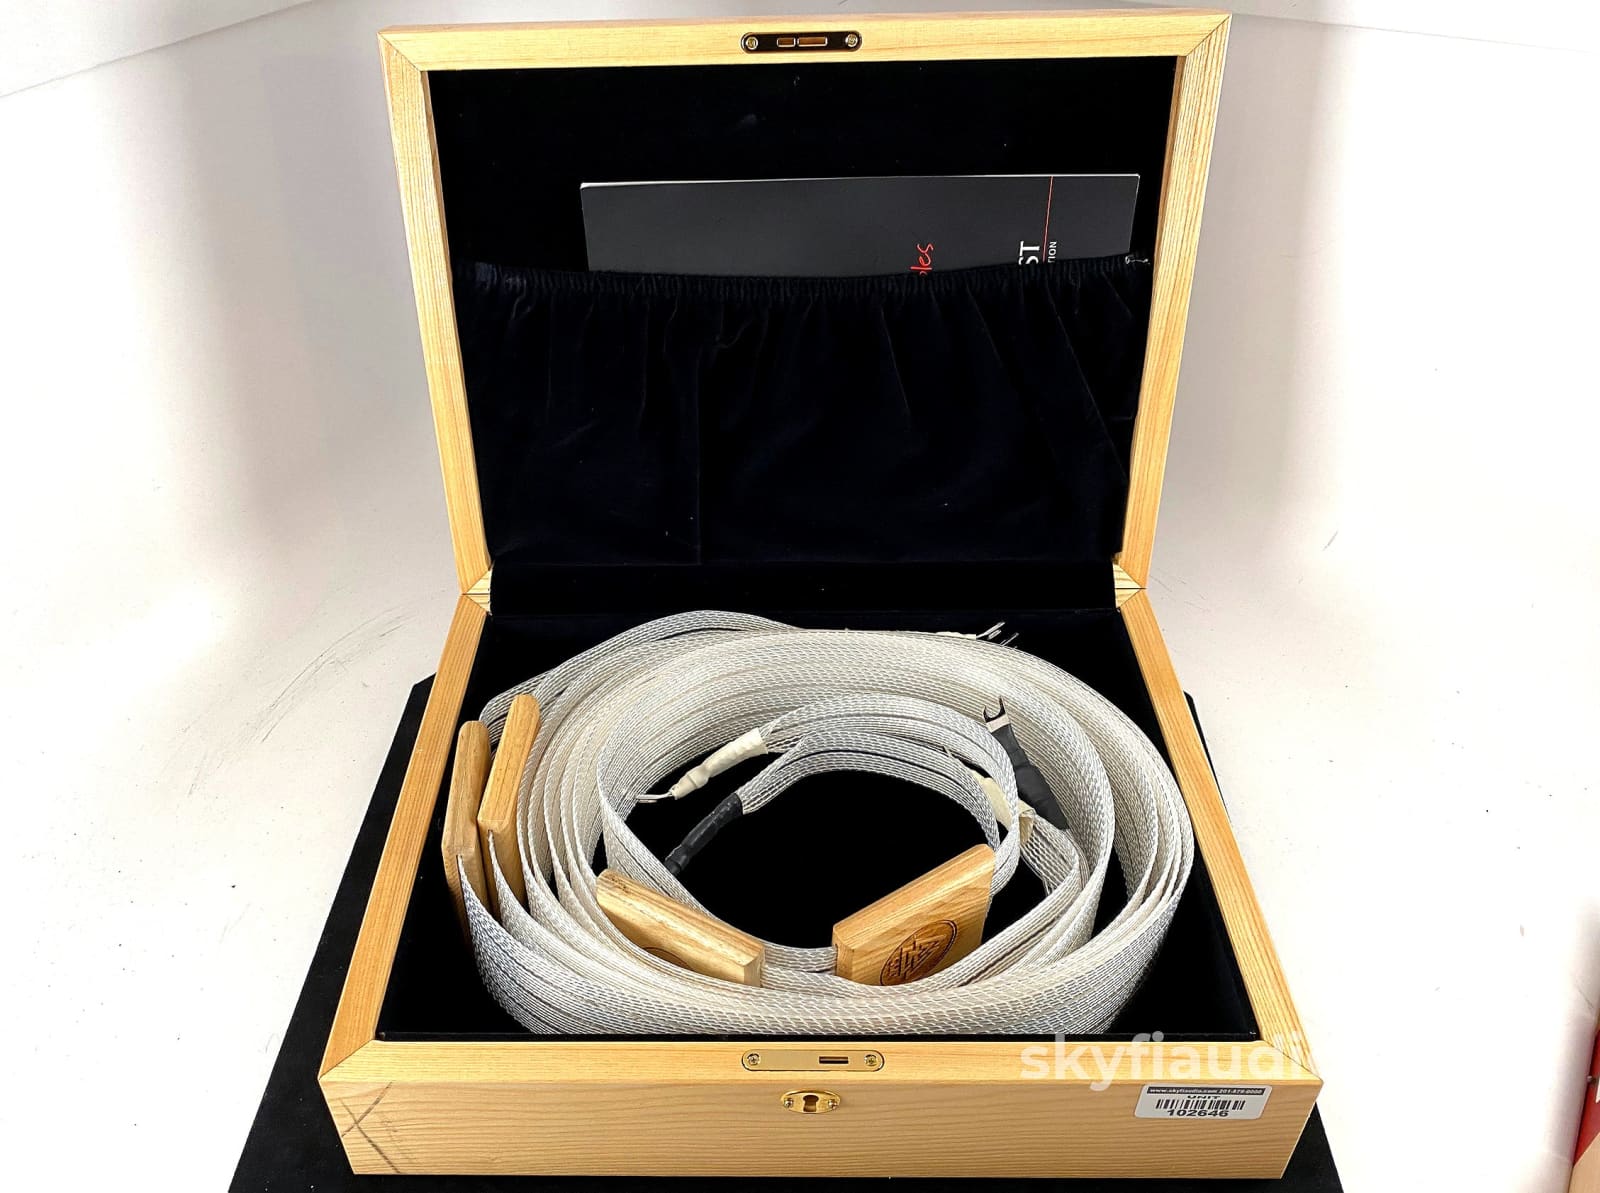 Nordost Odin Supreme Reference Pure Silver Speaker Cables - Like New In Original Wood Case 3.5M